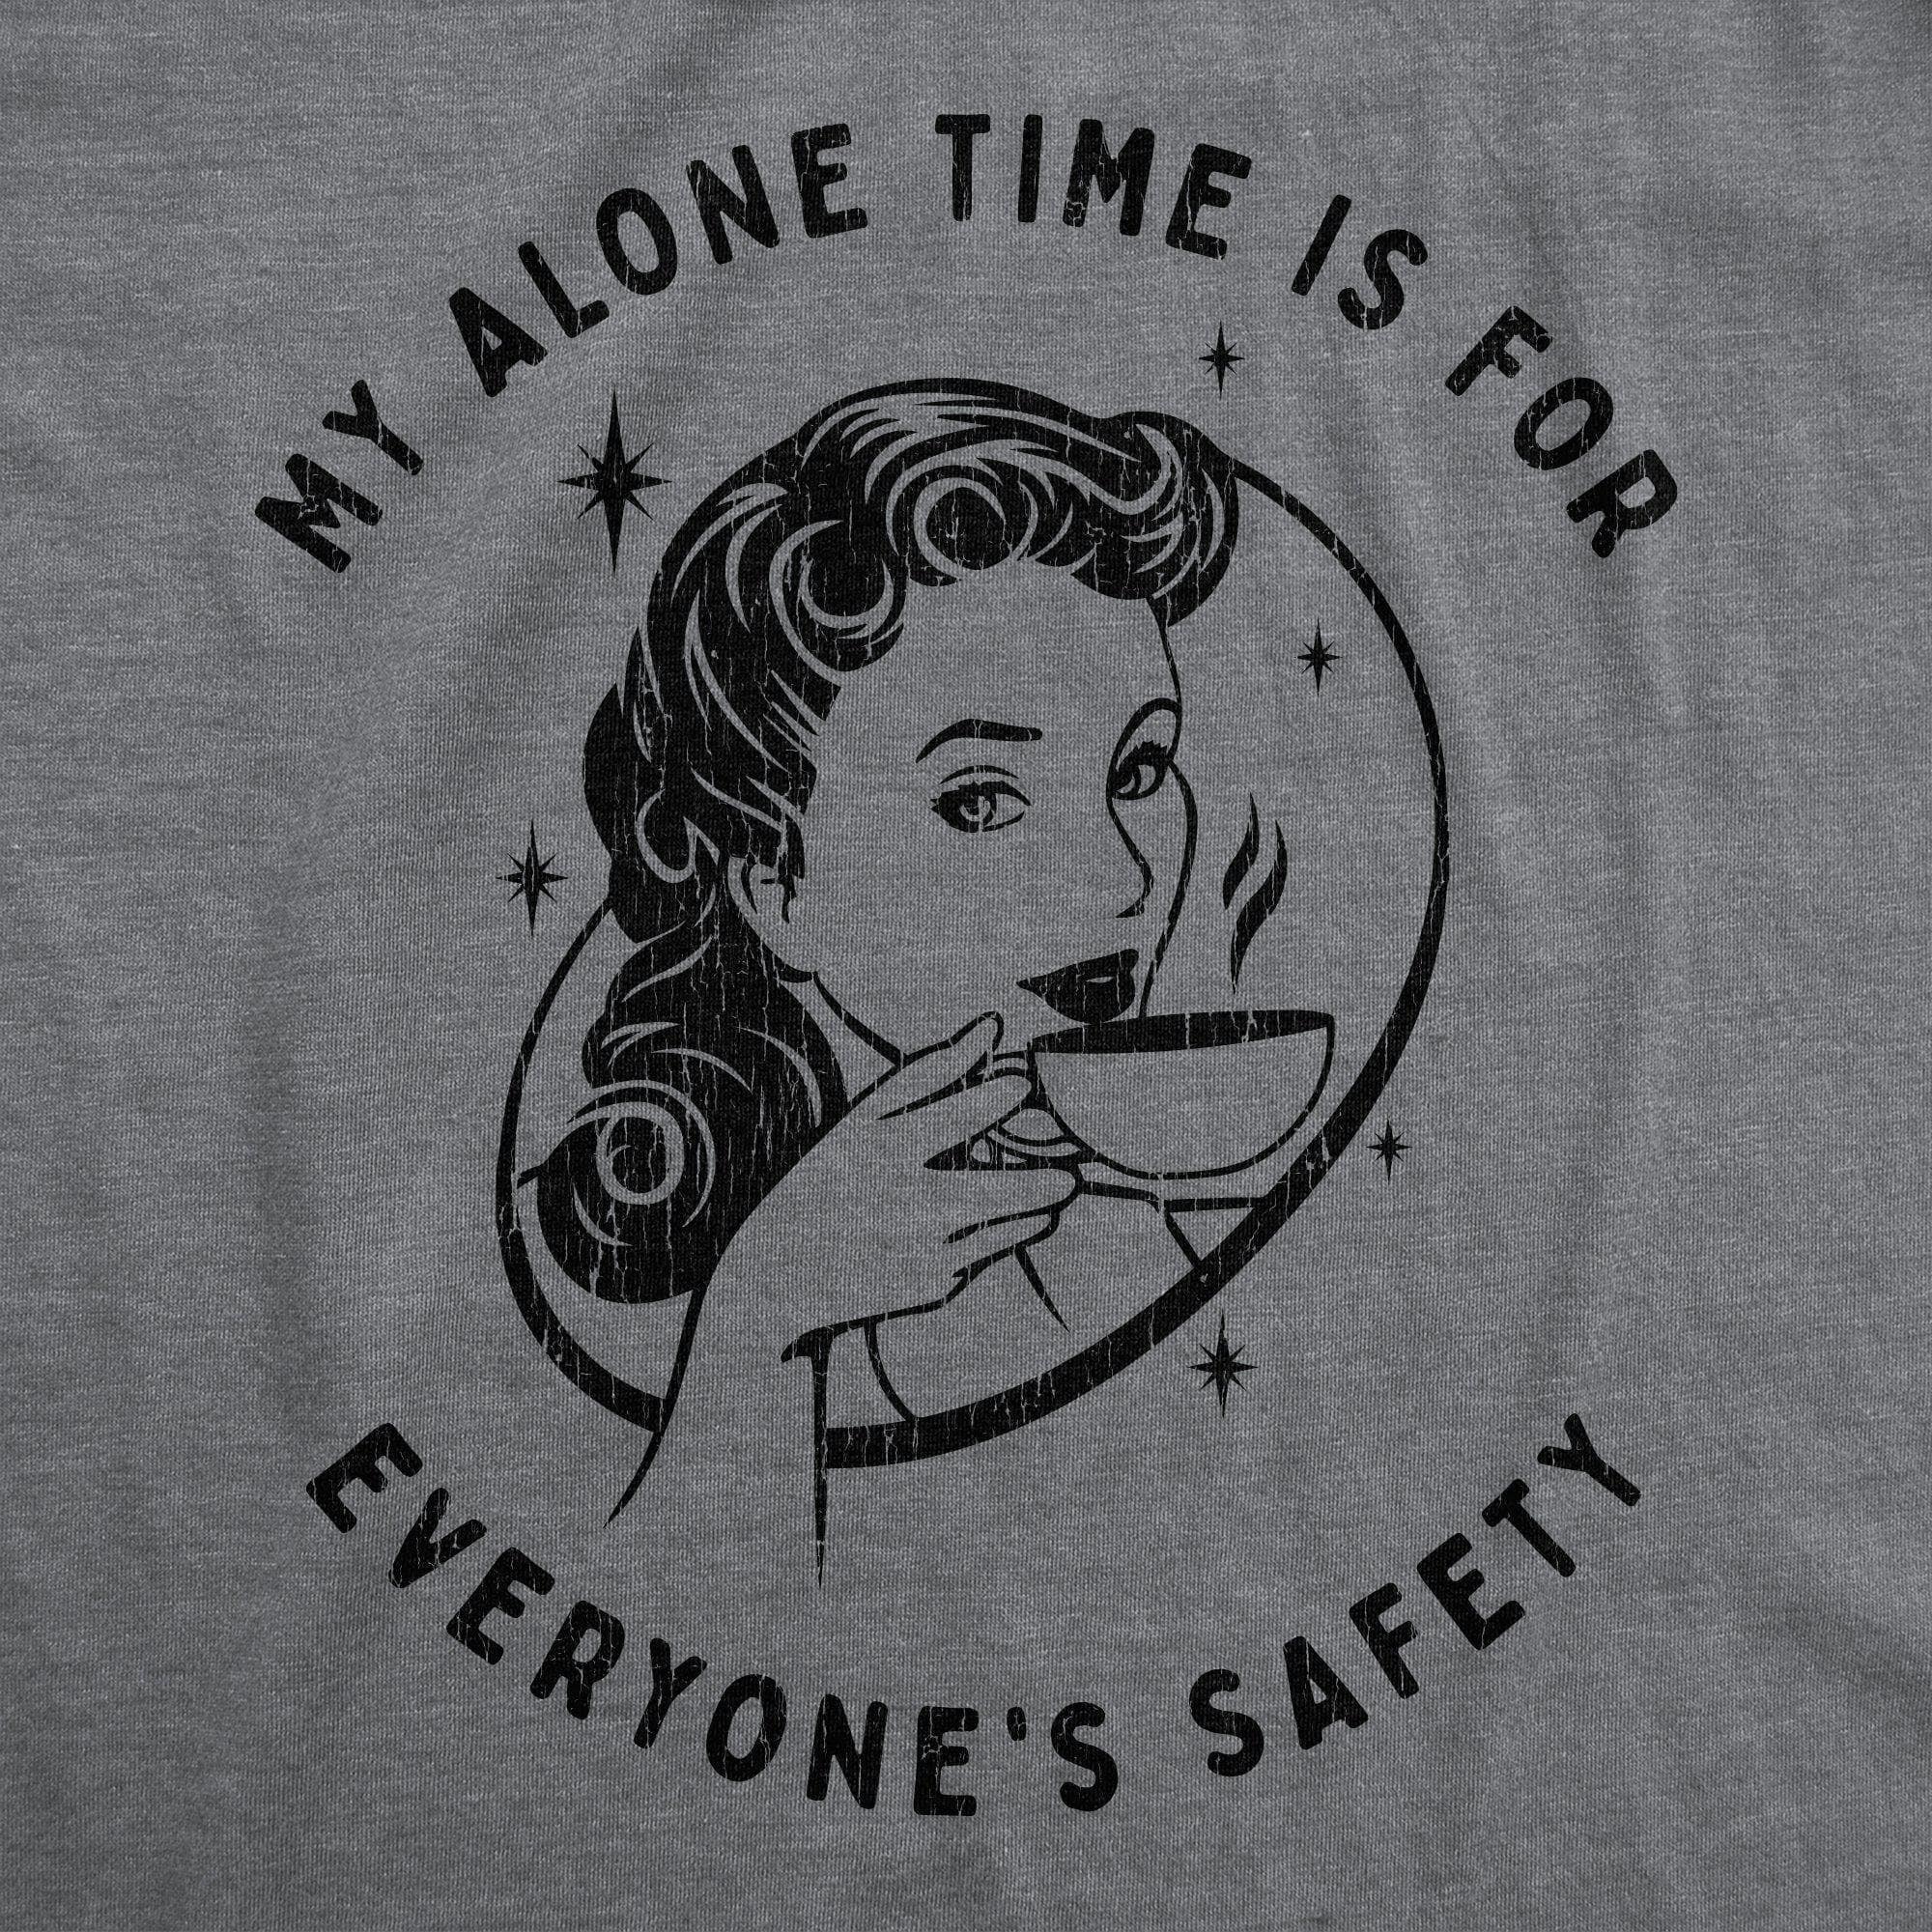 My Alone Time Is For Everyone's Safety Women's Tshirt  -  Crazy Dog T-Shirts